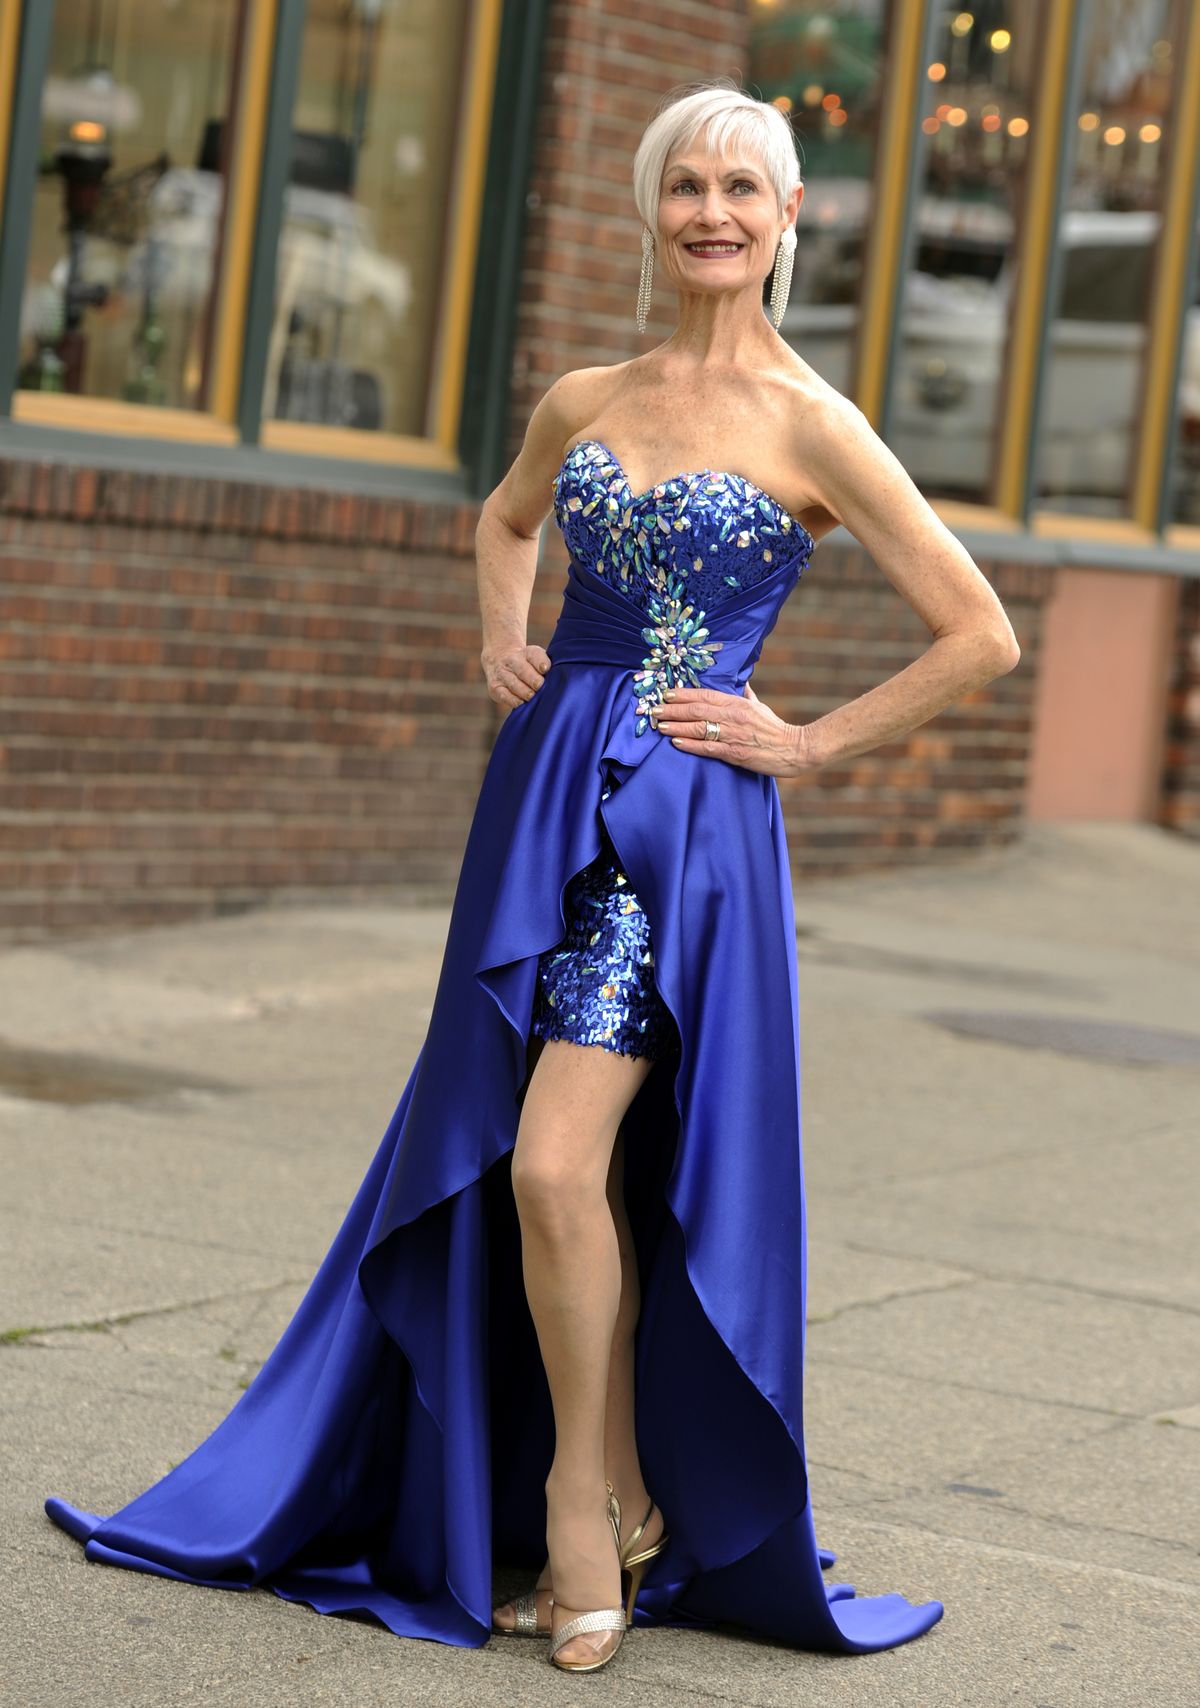 Trudy Raymond models a dress from Finders Keepers II in downtown Spokane on May 23. (Jesse Tinsley)